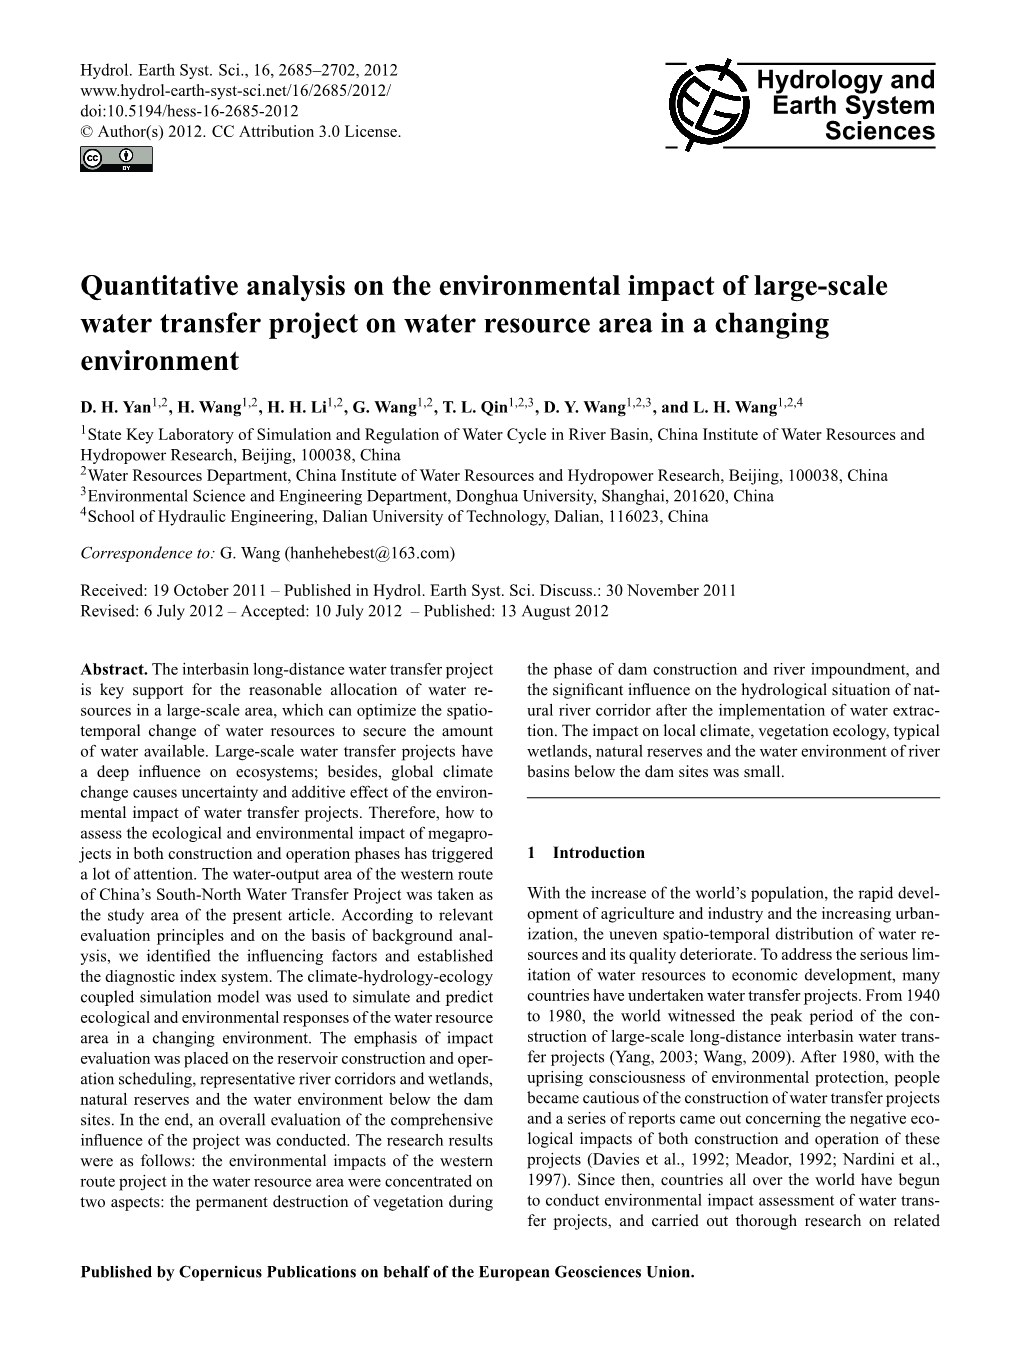 Quantitative Analysis on the Environmental Impact of Large-Scale Water Transfer Project on Water Resource Area in a Changing Environment